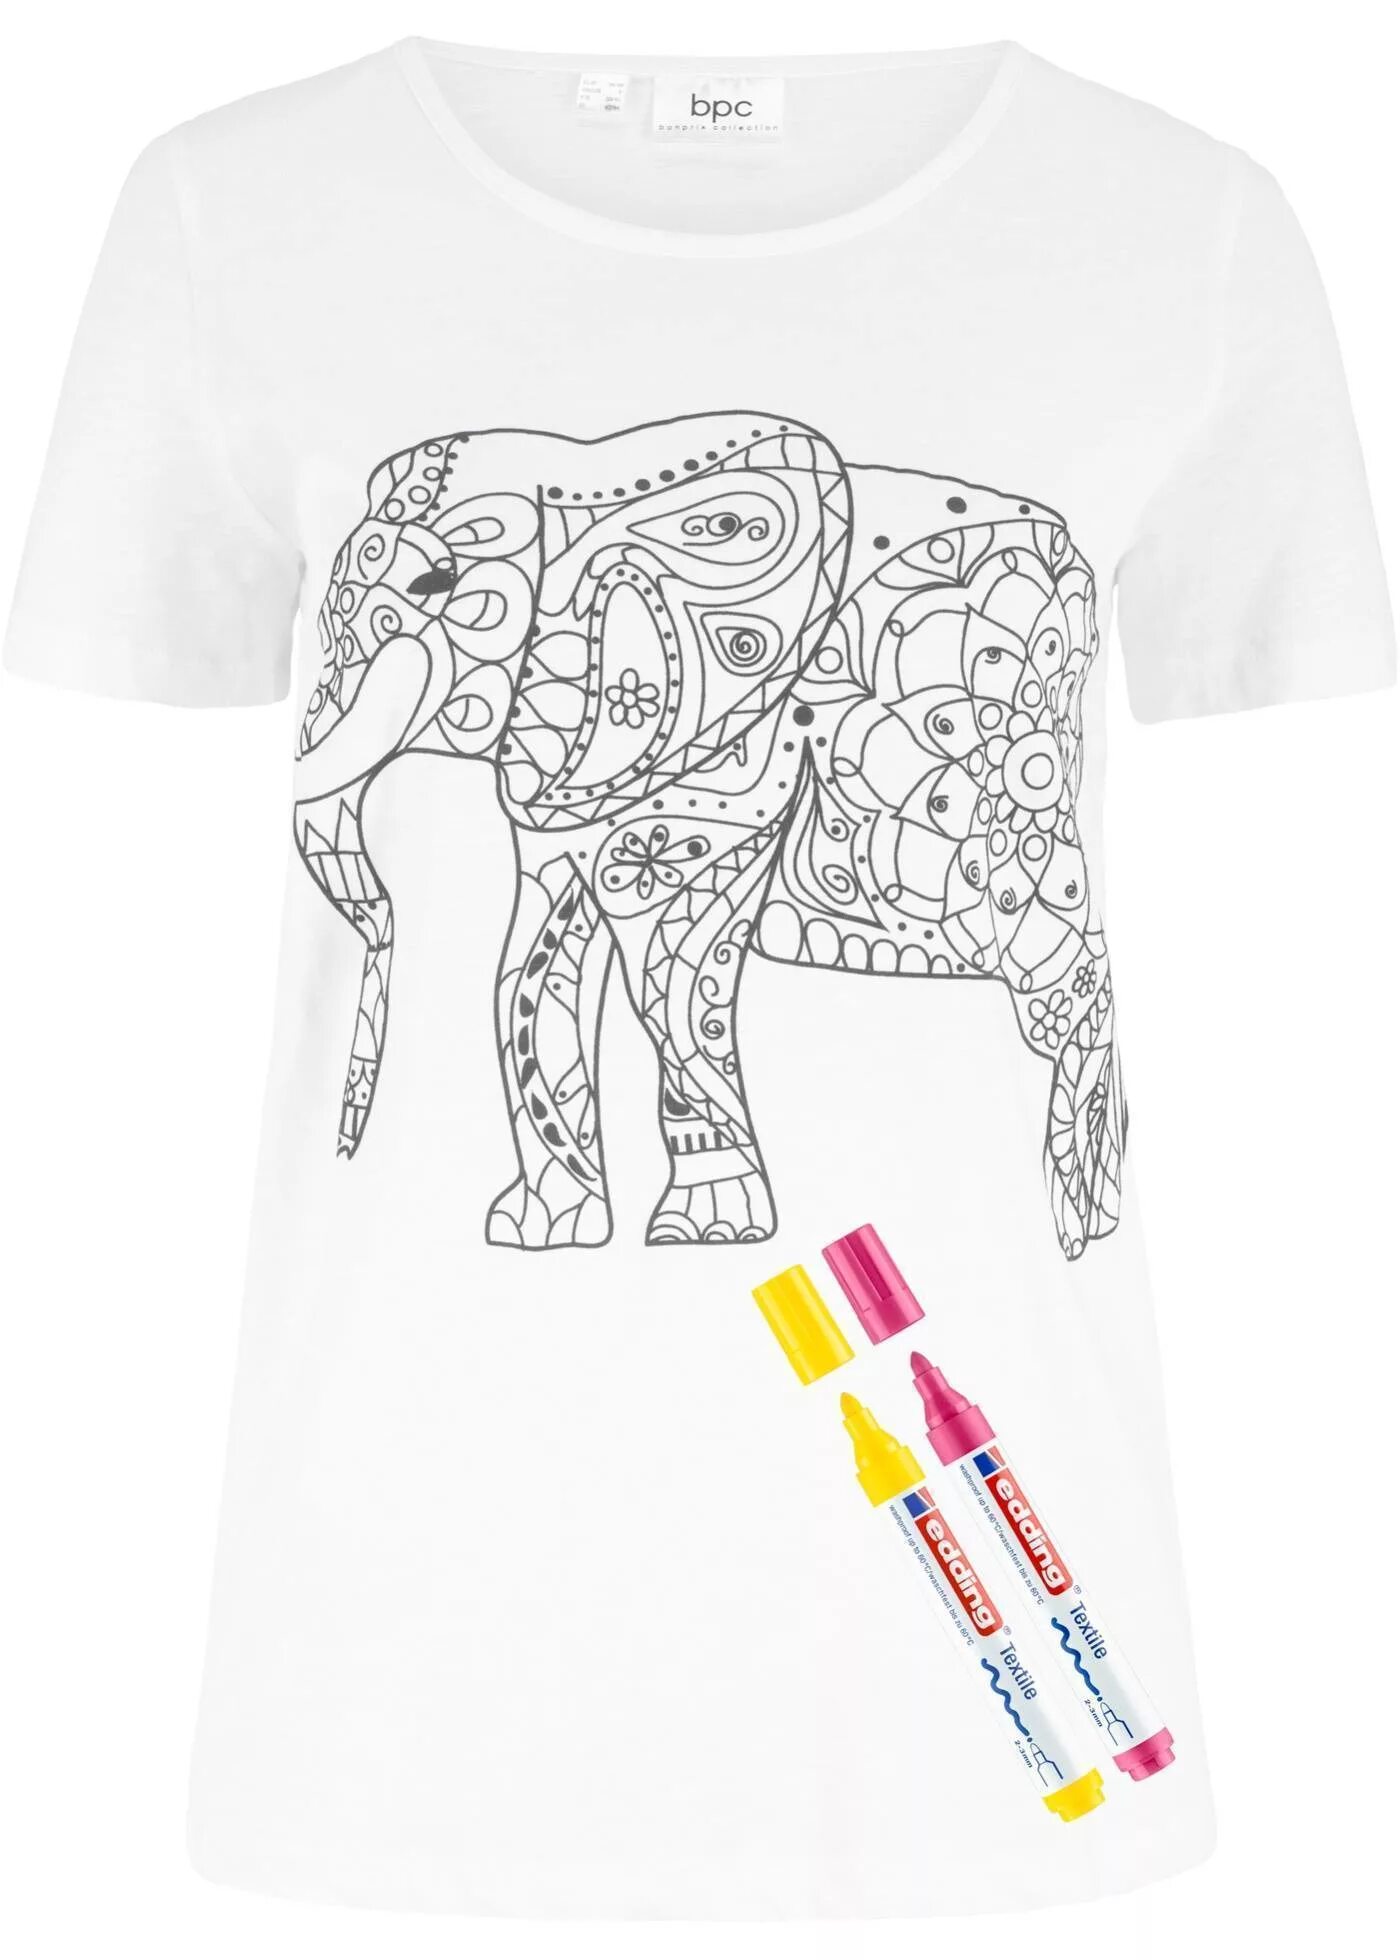 Amazingly animated T-shirt coloring page with felt-tip pens